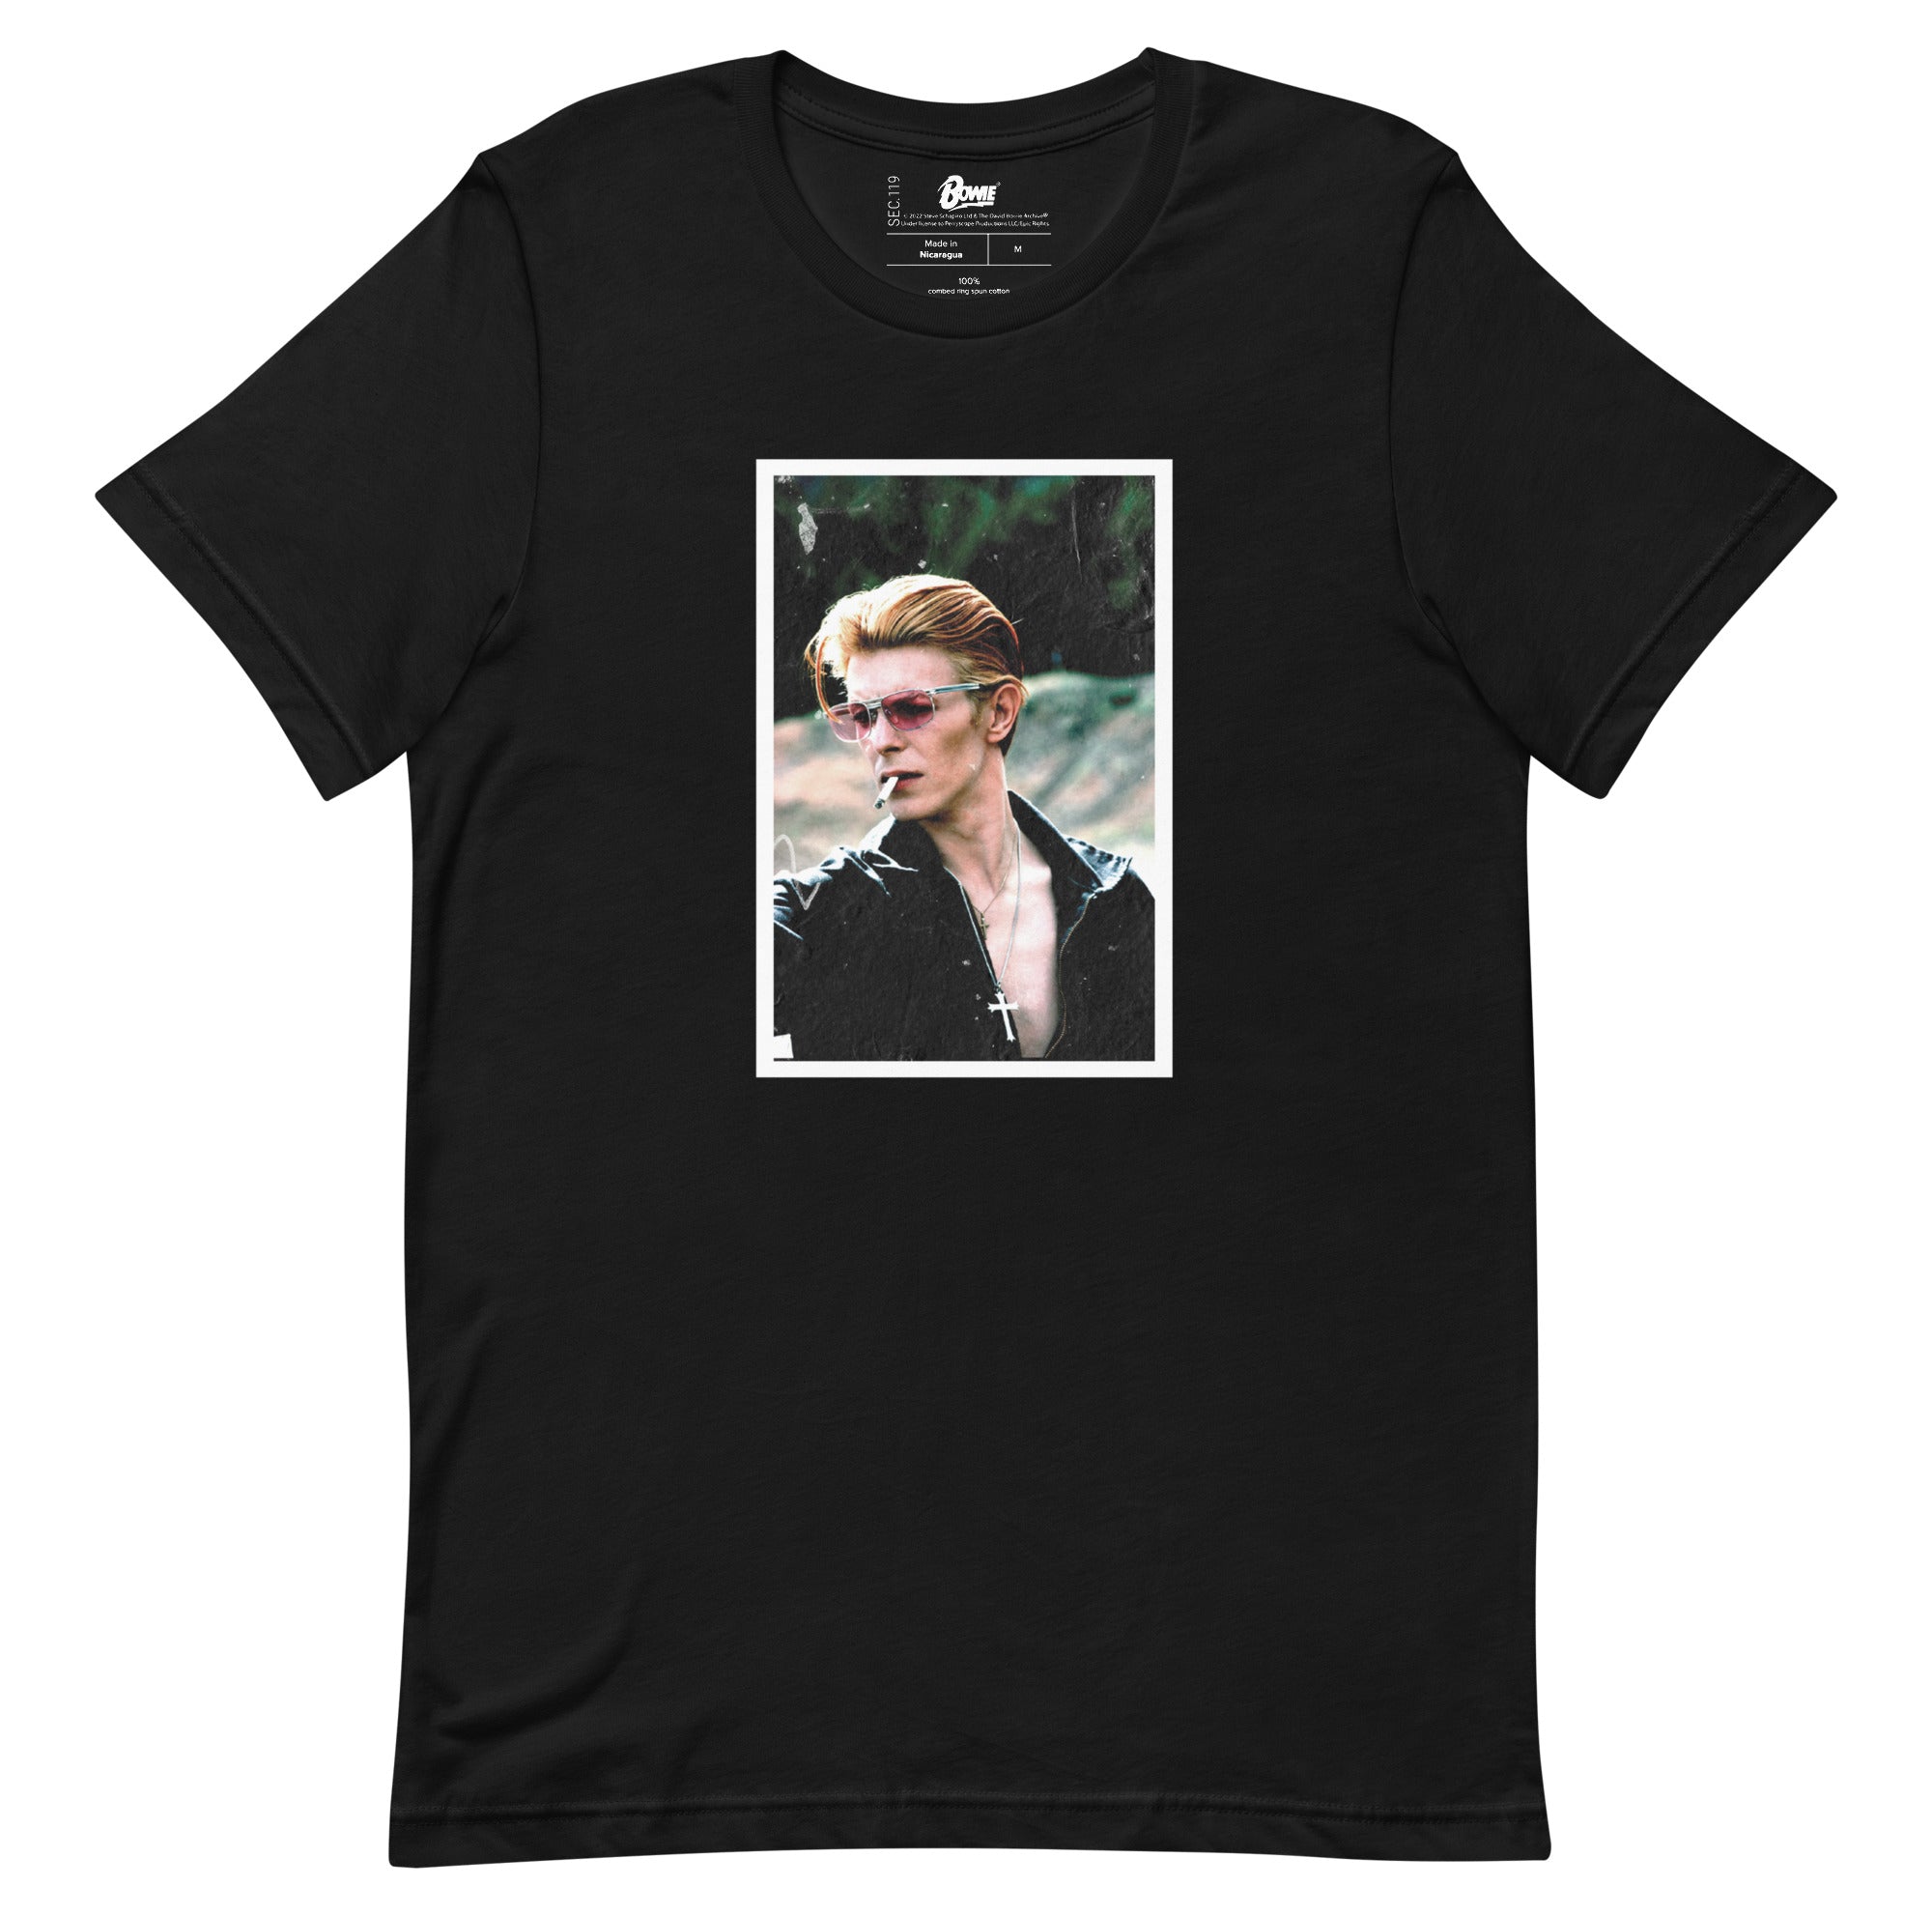 David Bowie Cigarette Tee in Black - Section 119